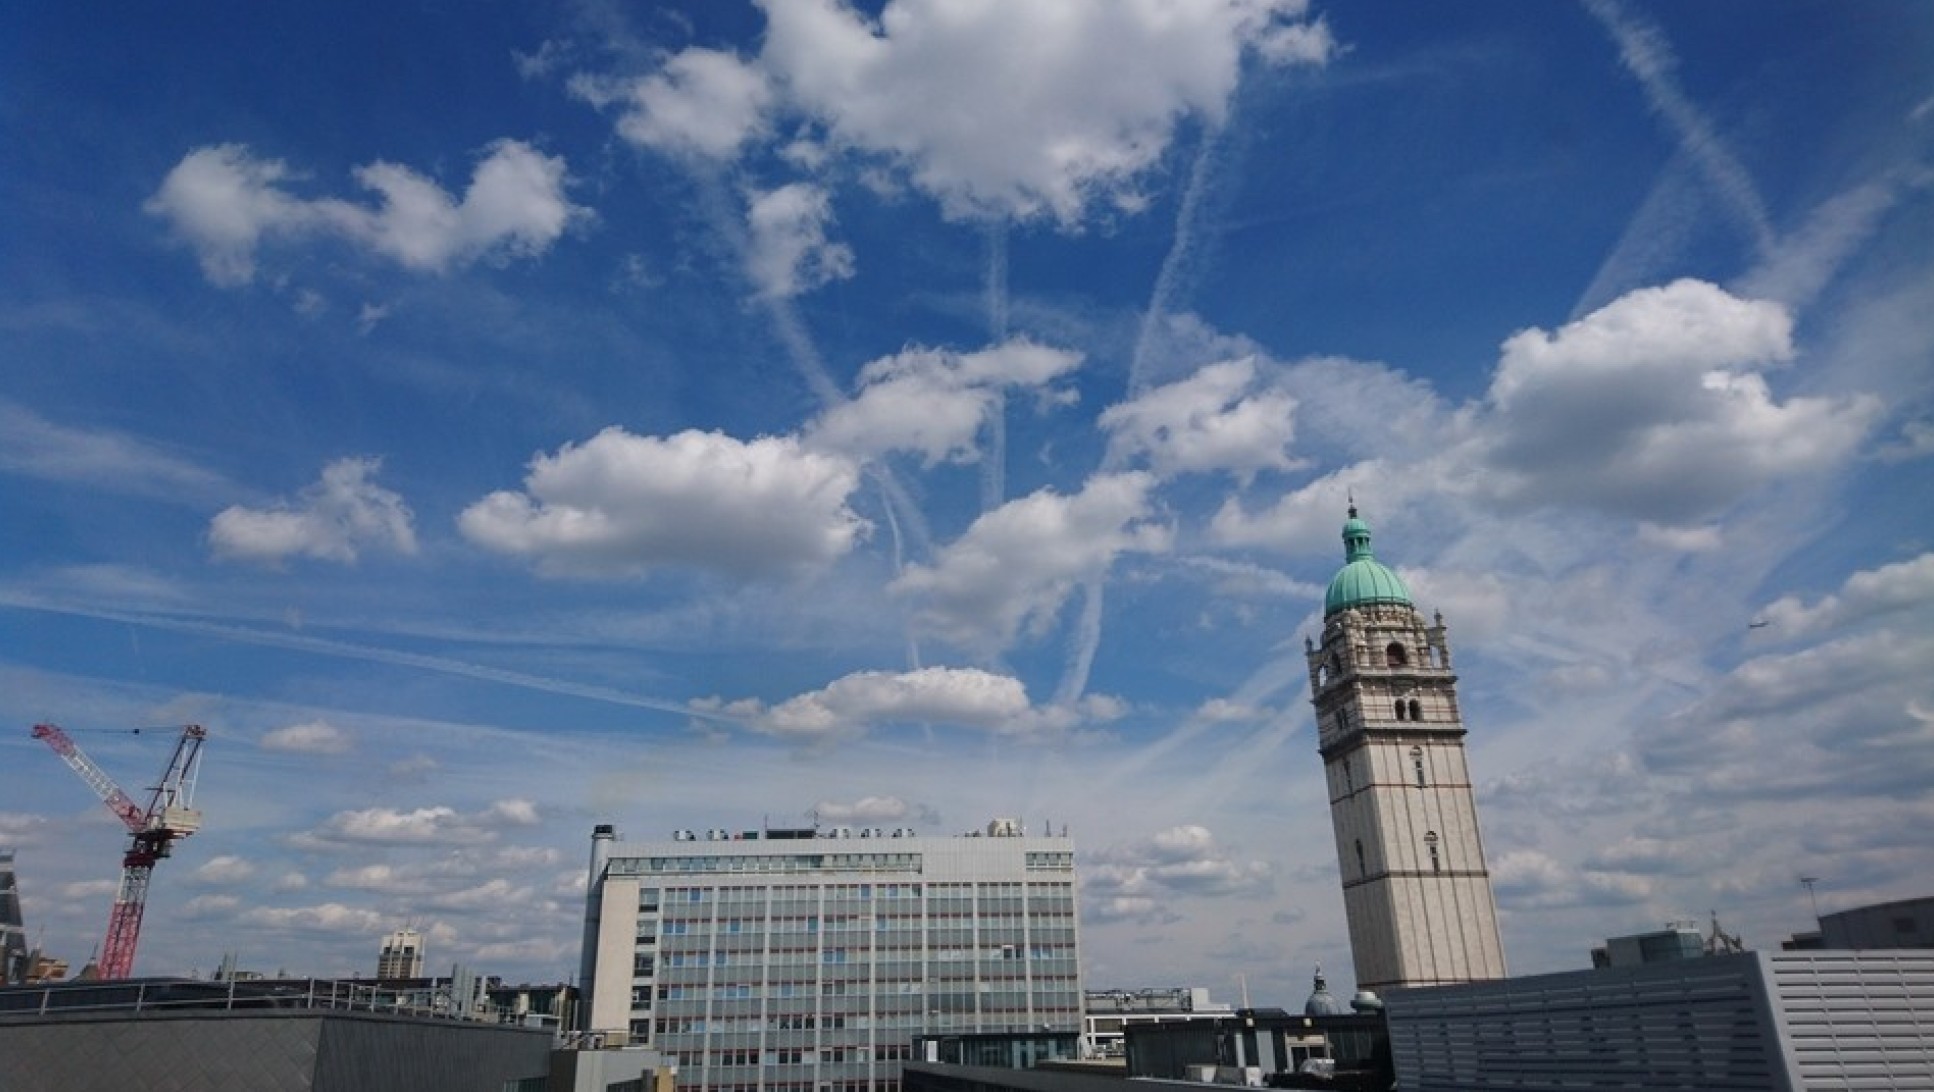 Contrails in the sky above Imperial College London